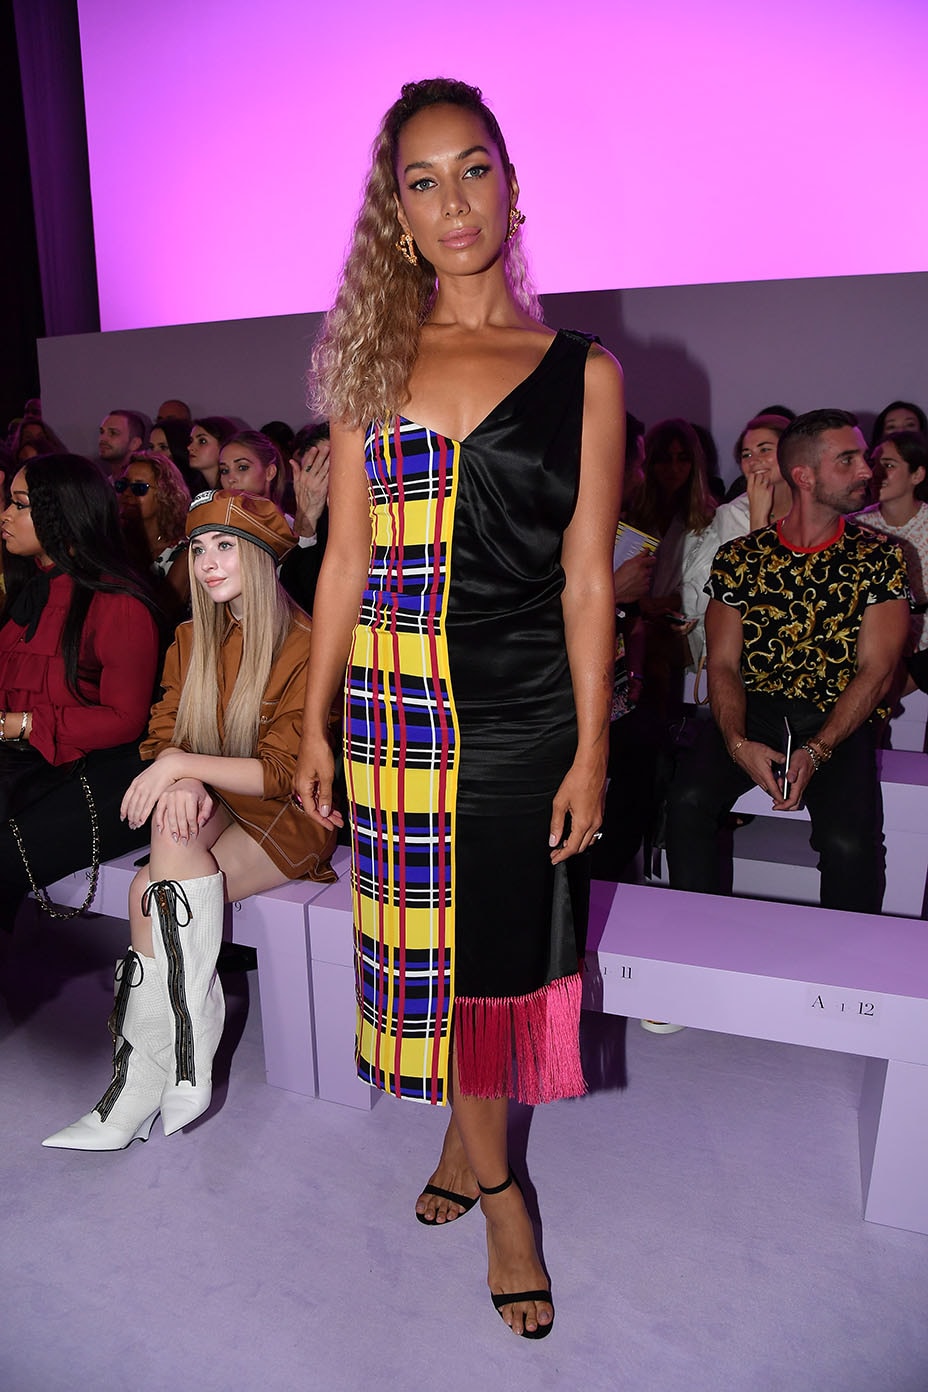 Leona Lewis attends the Versace show during Milan Fashion Week Spring/Summer 2019 on September 21, 2018 in Milan, Italy. (Getty Images)